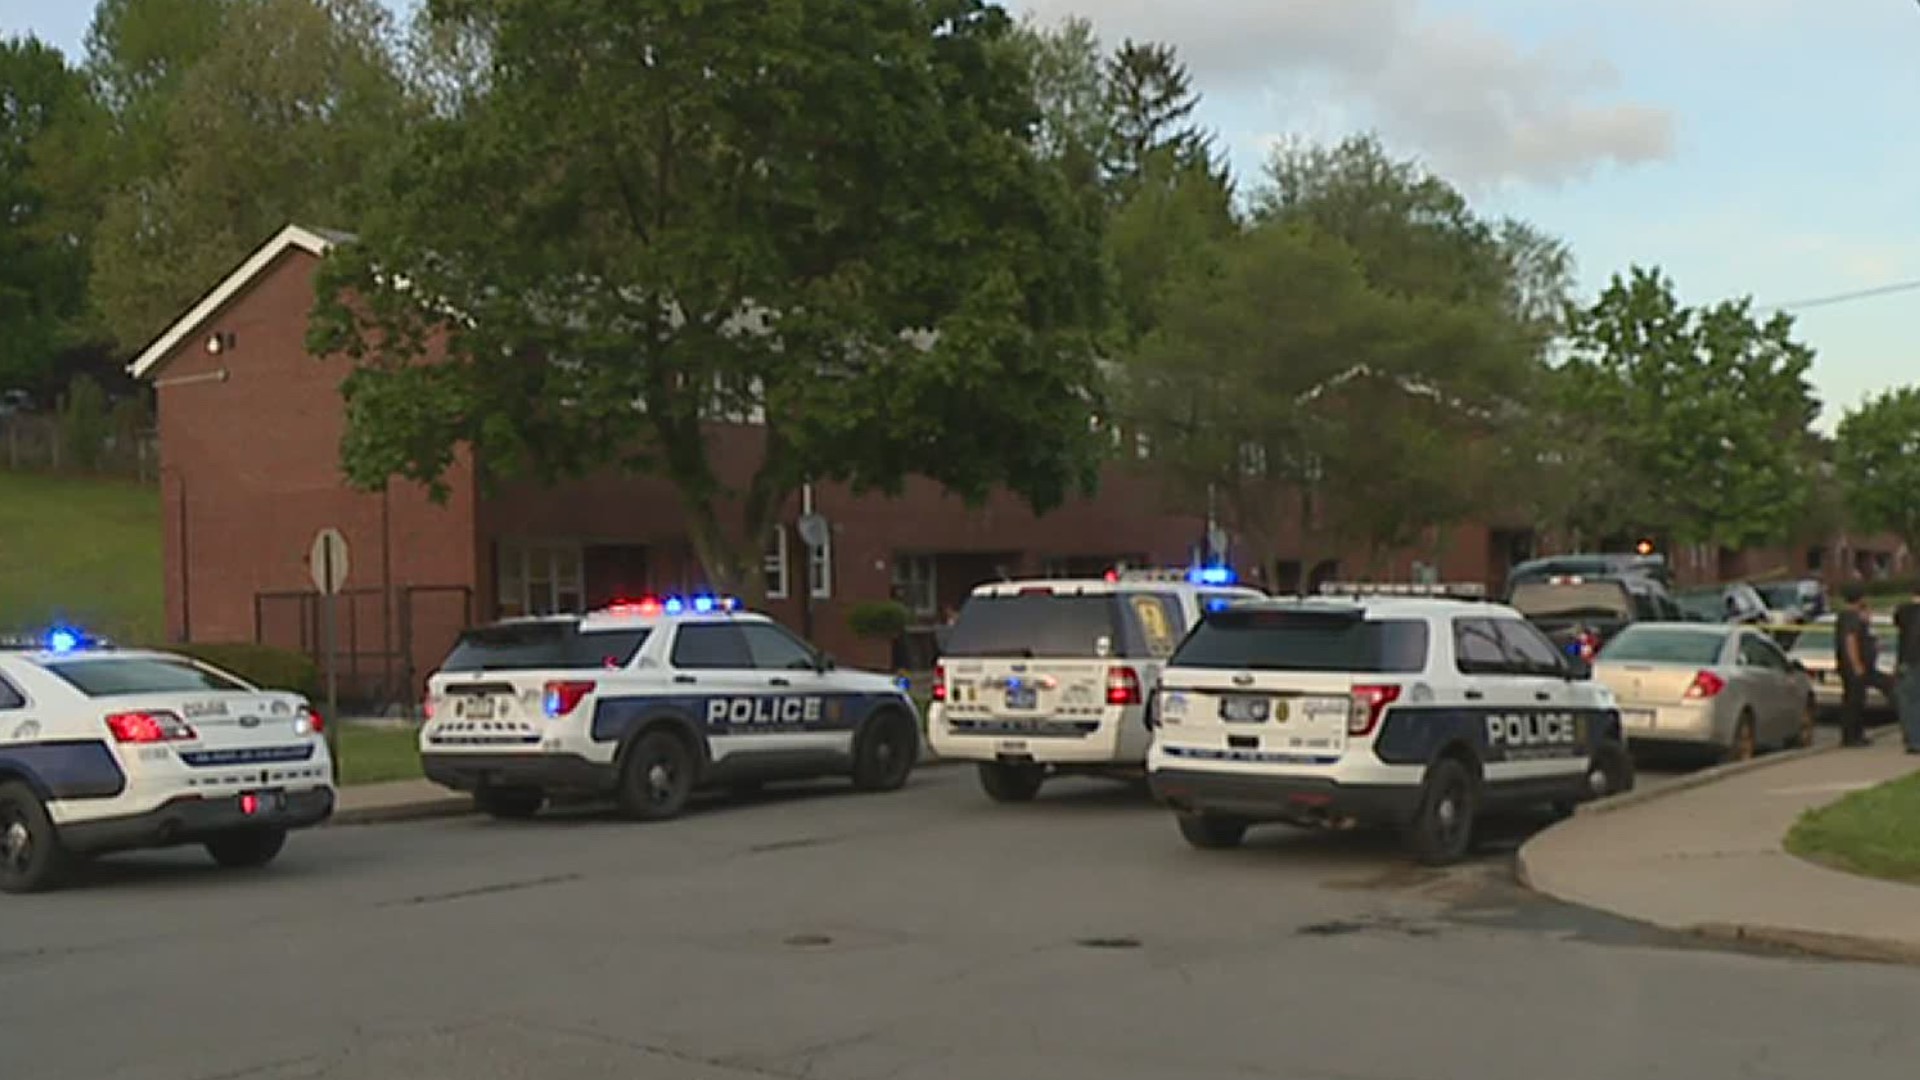 Police have a man in custody after a shots fired incident in Scranton's north end.